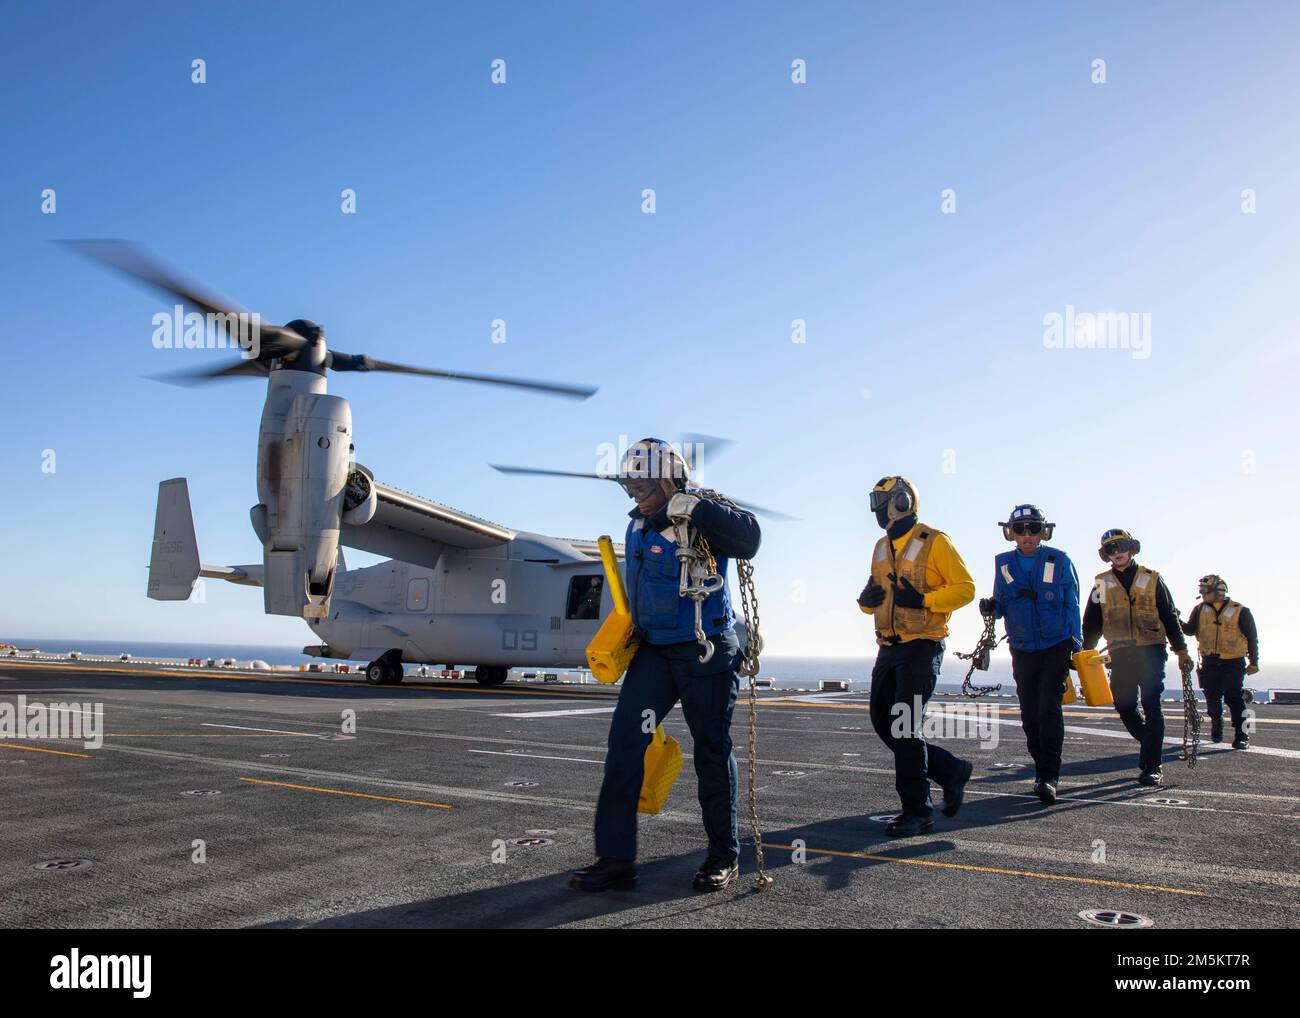 220323-N-IV962-1282    PACIFIC OCEAN (March 23, 2022) – Sailors depart the rotor arc of an MV-22 Osprey, assigned to Marine Medium Tiltrotor Squadron (VMM) 362, aboard amphibious assault ship USS Makin Island (LHD 8), March 23. Makin Island is underway conducting routine operations in U.S. 3rd Fleet. Stock Photo